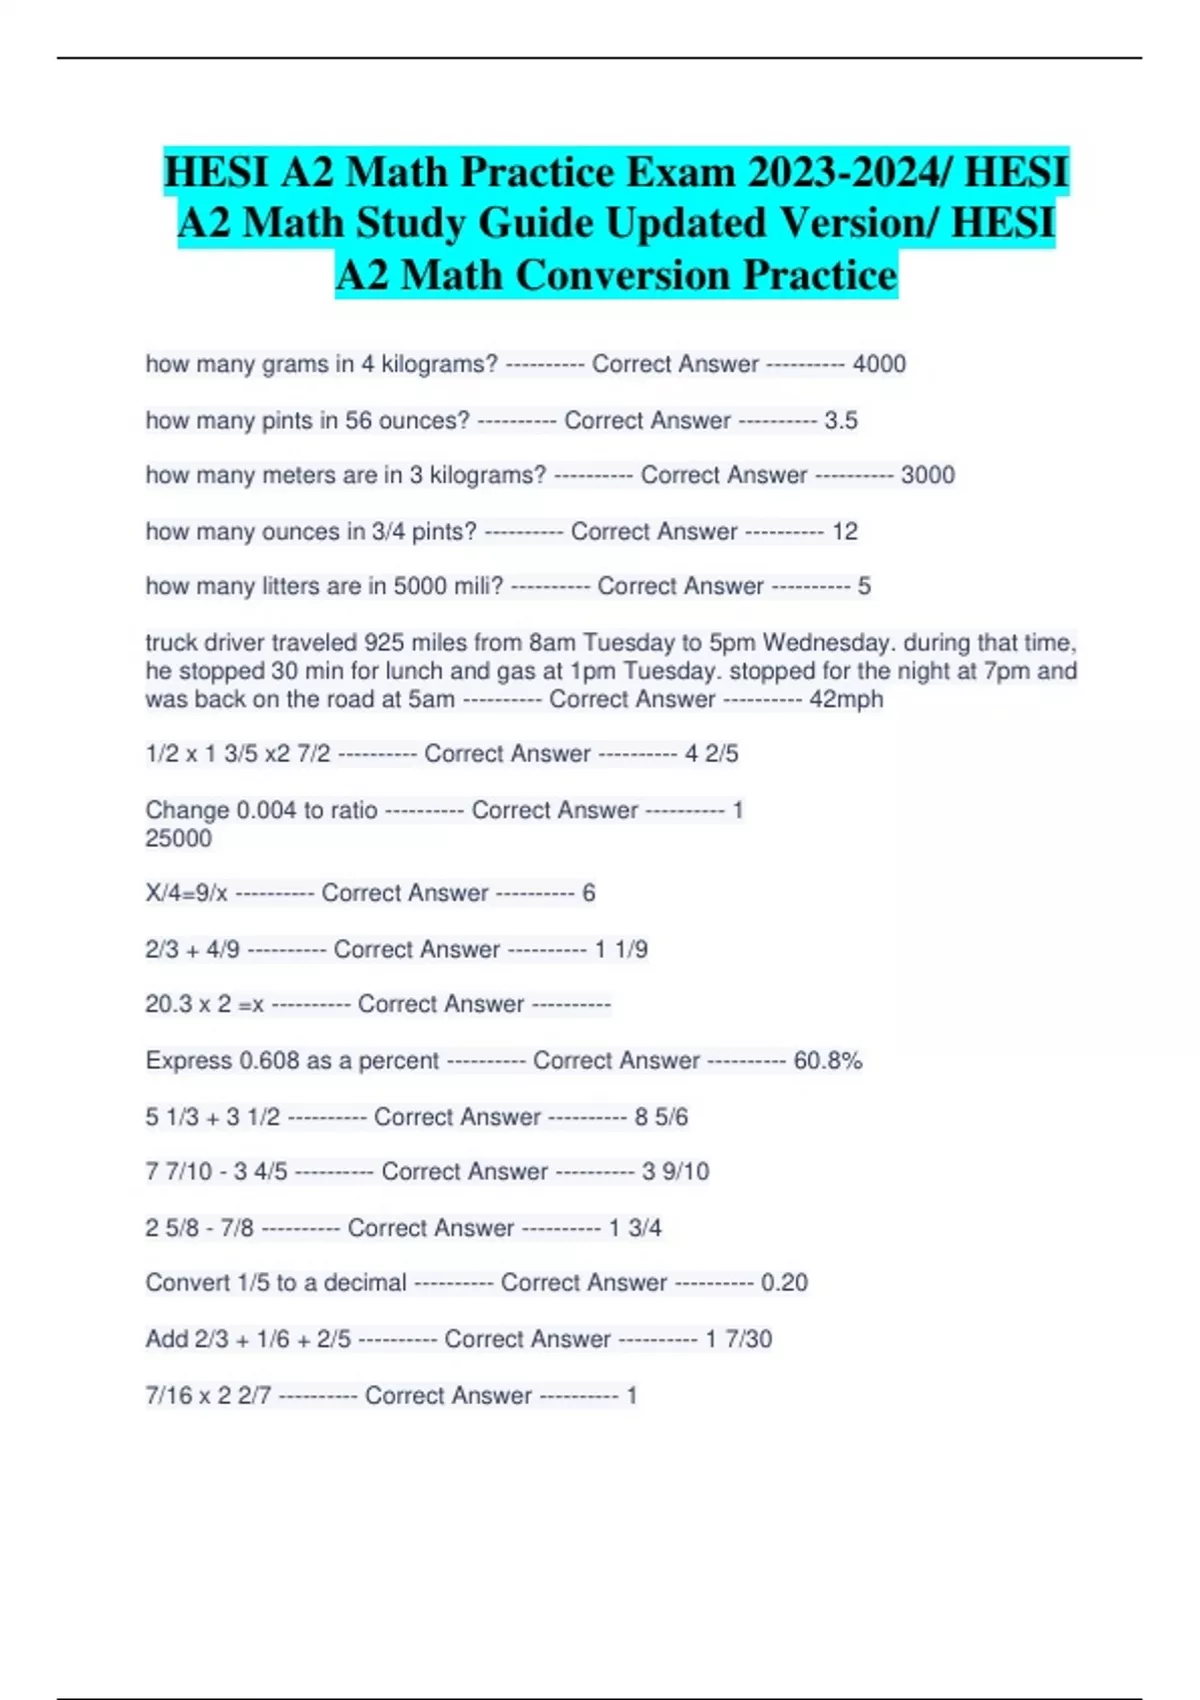 hesi-a2-math-practice-exam-hesi-a2-math-study-guide-updated-version